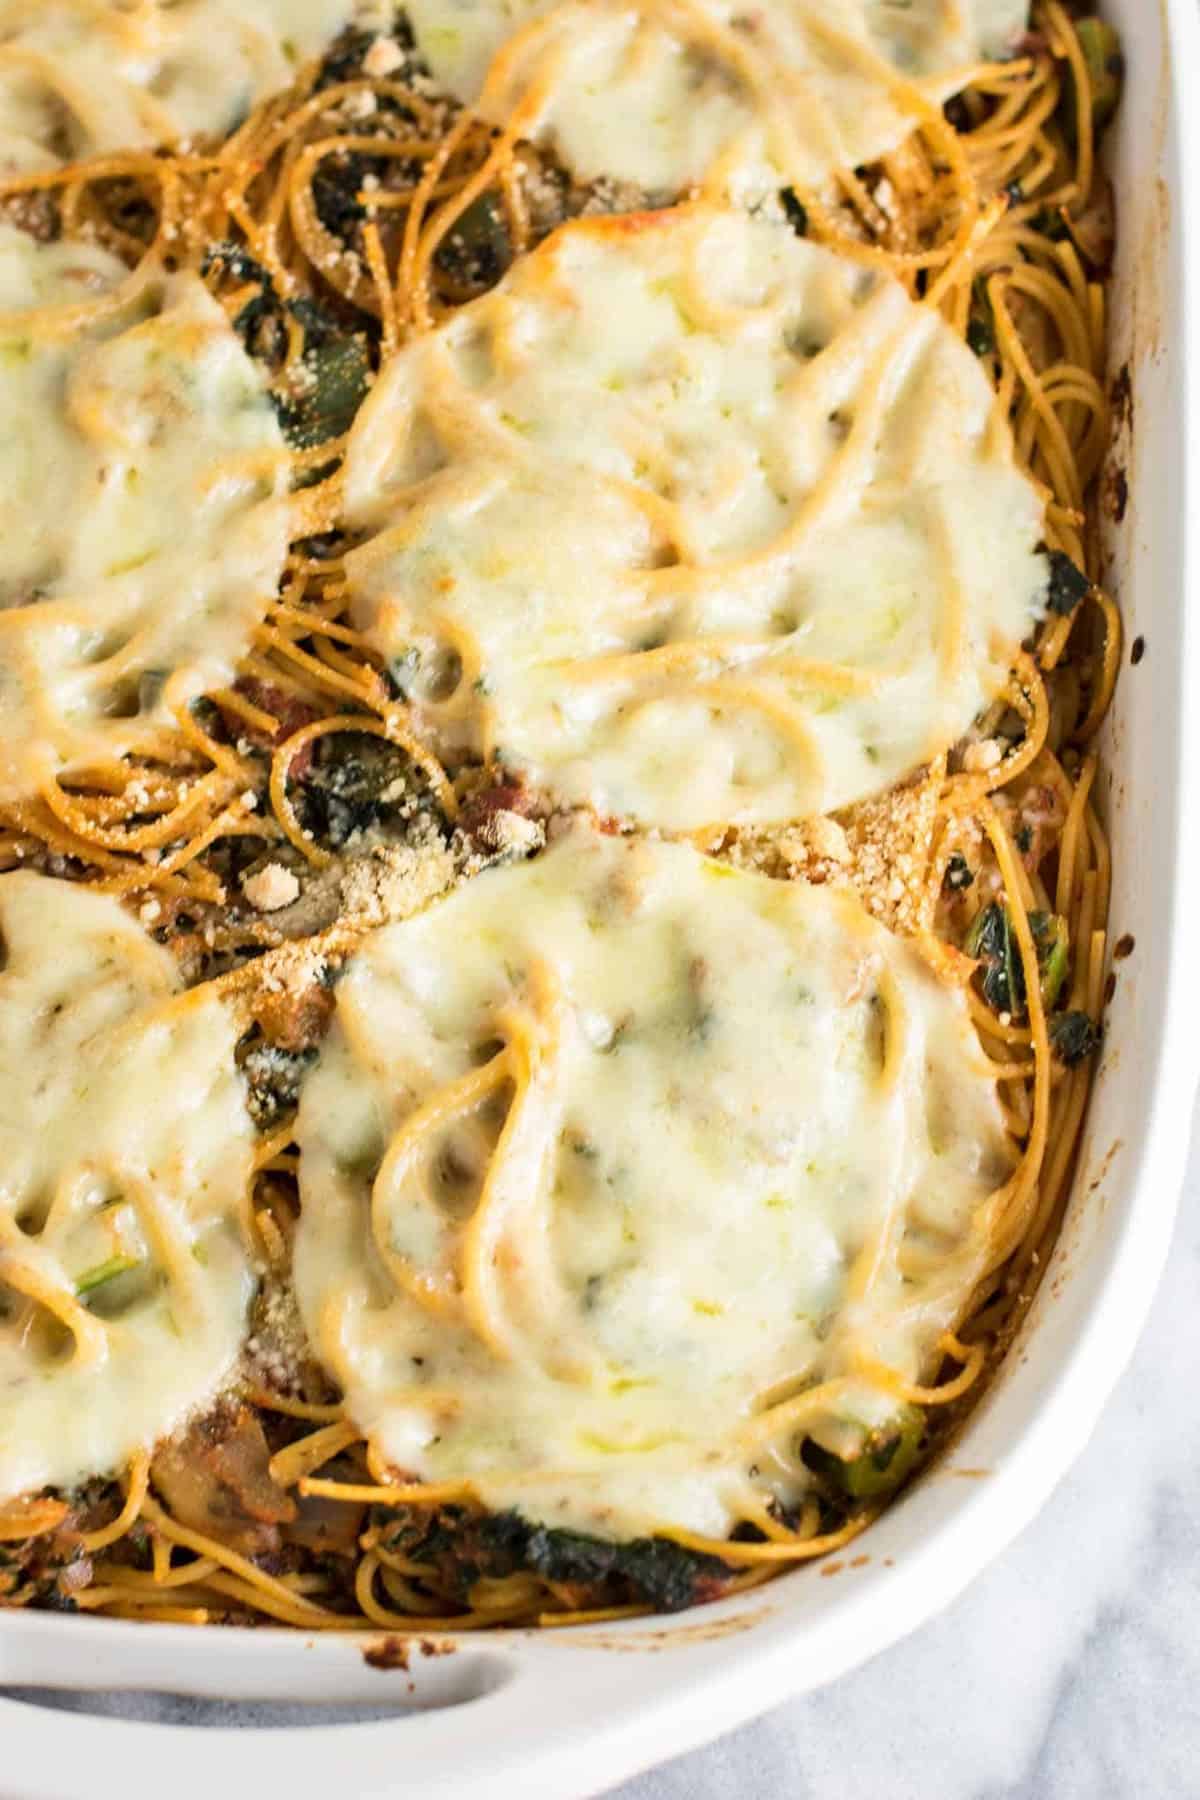 Healthy Baked Spaghetti Recipe – a healthier veggie packed way to get your pasta fix. Family friendly + easy weeknight dinner. #healthybakedspaghetti #vegetarian #dinner #bakedspaghetti #veggies